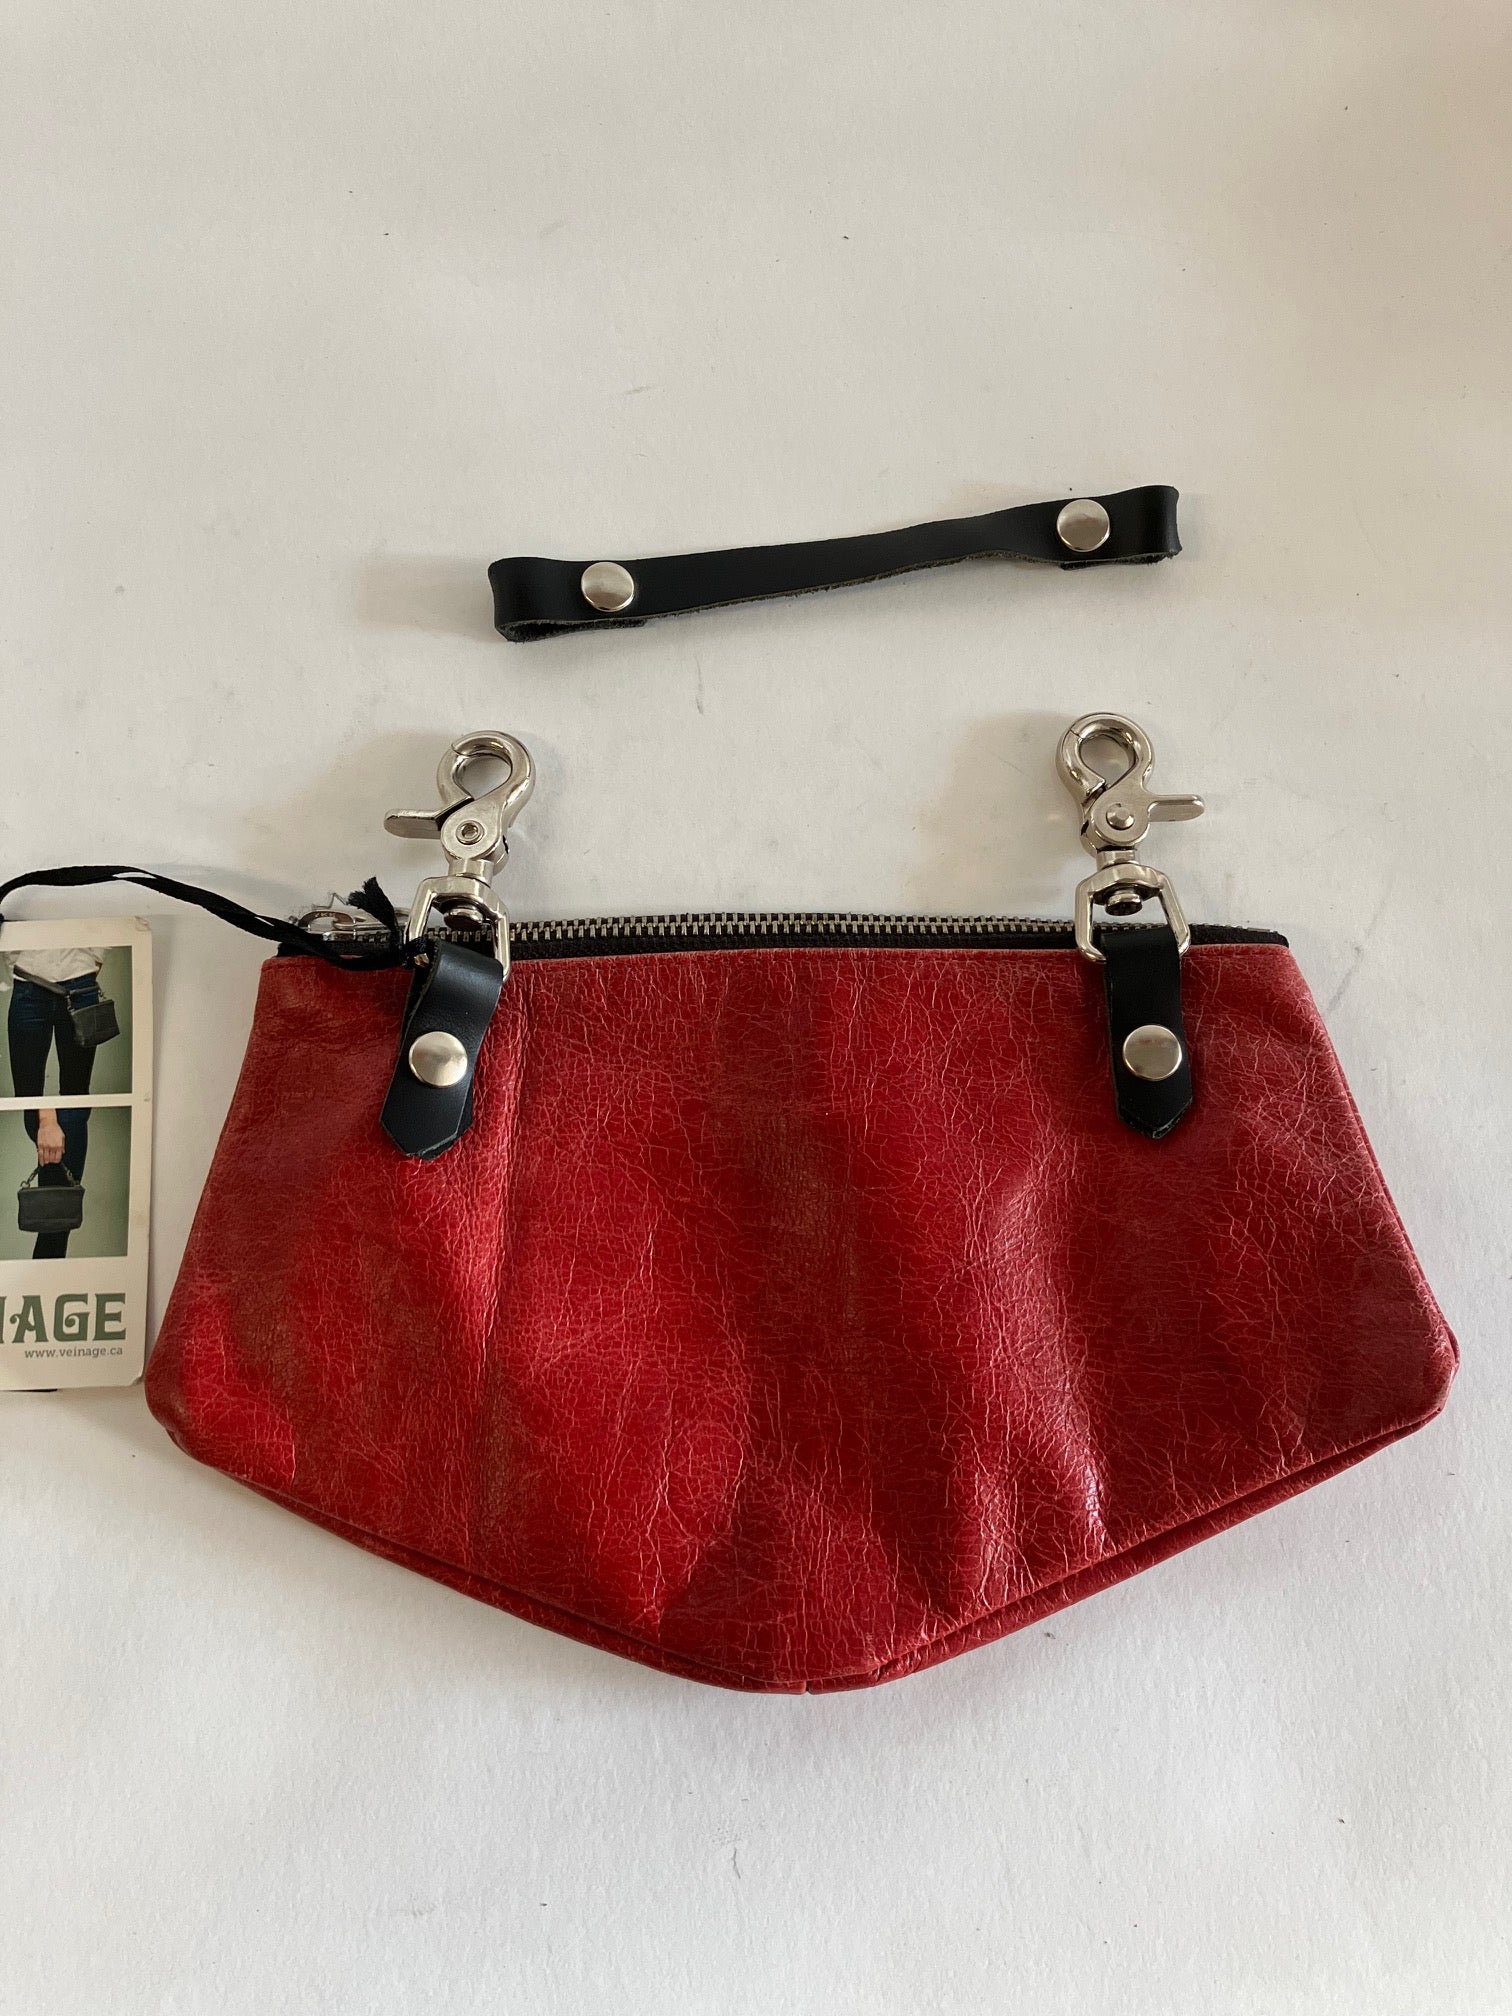 SAMPLE red leather fannypack, belt bag, pouch